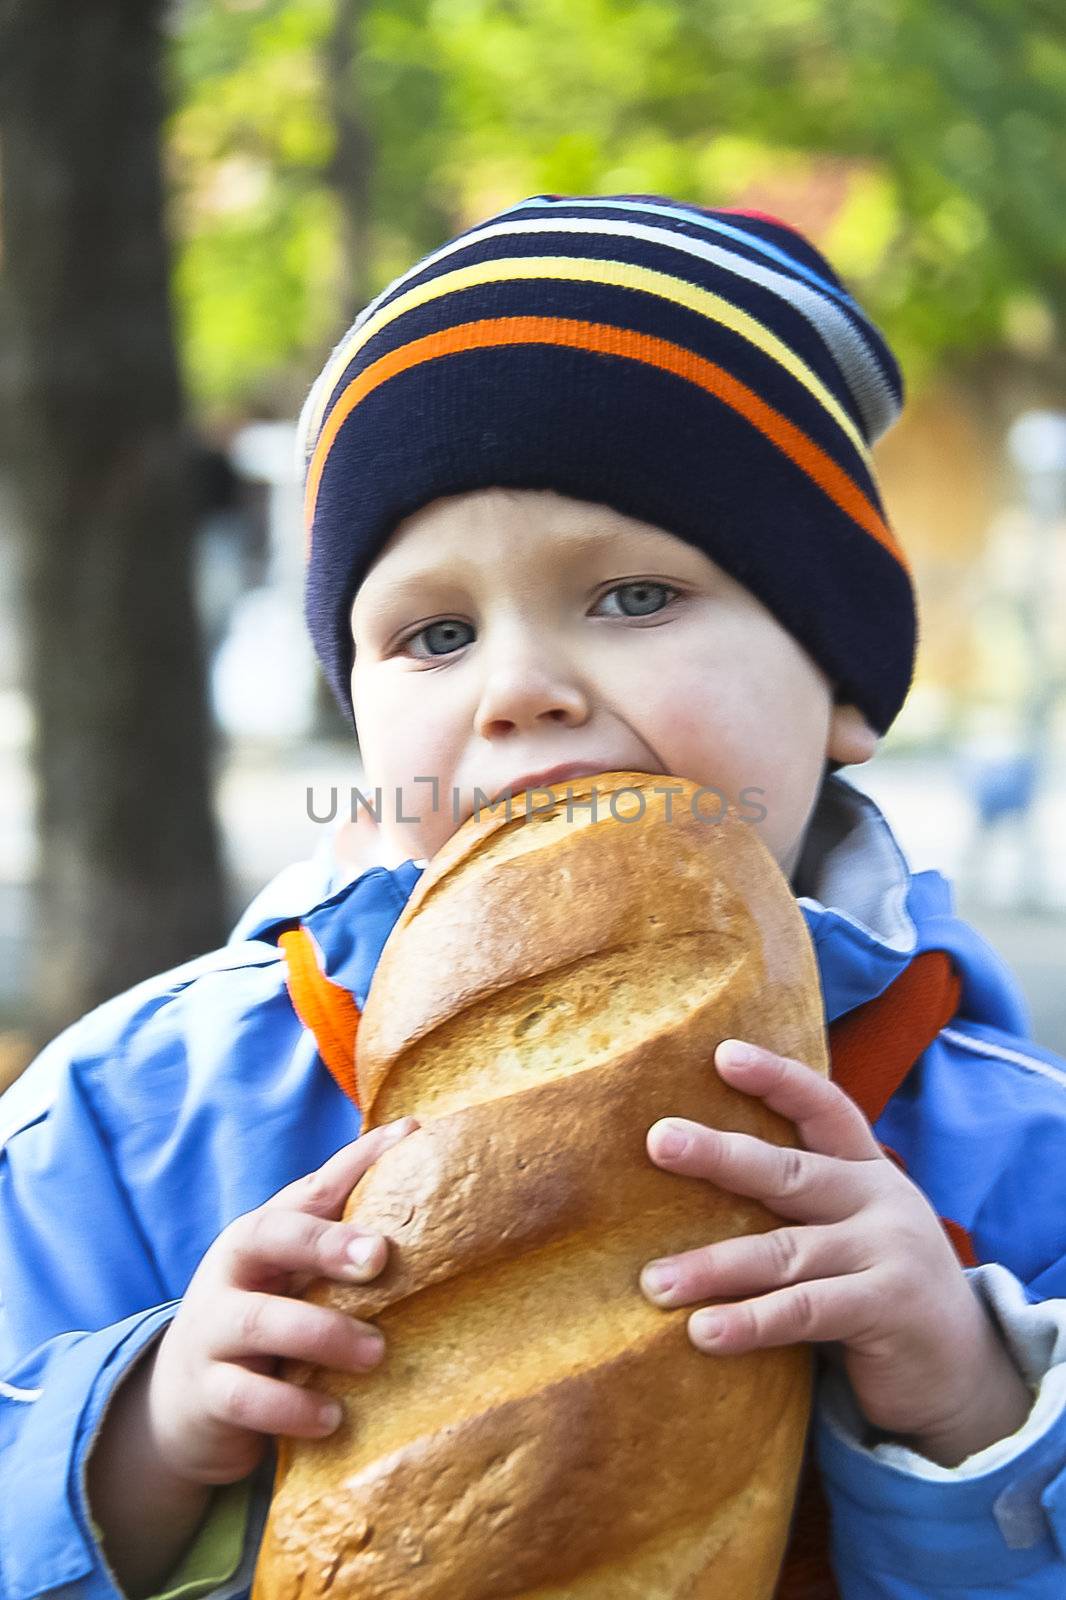 The kid eats bread during autumn walk in the park